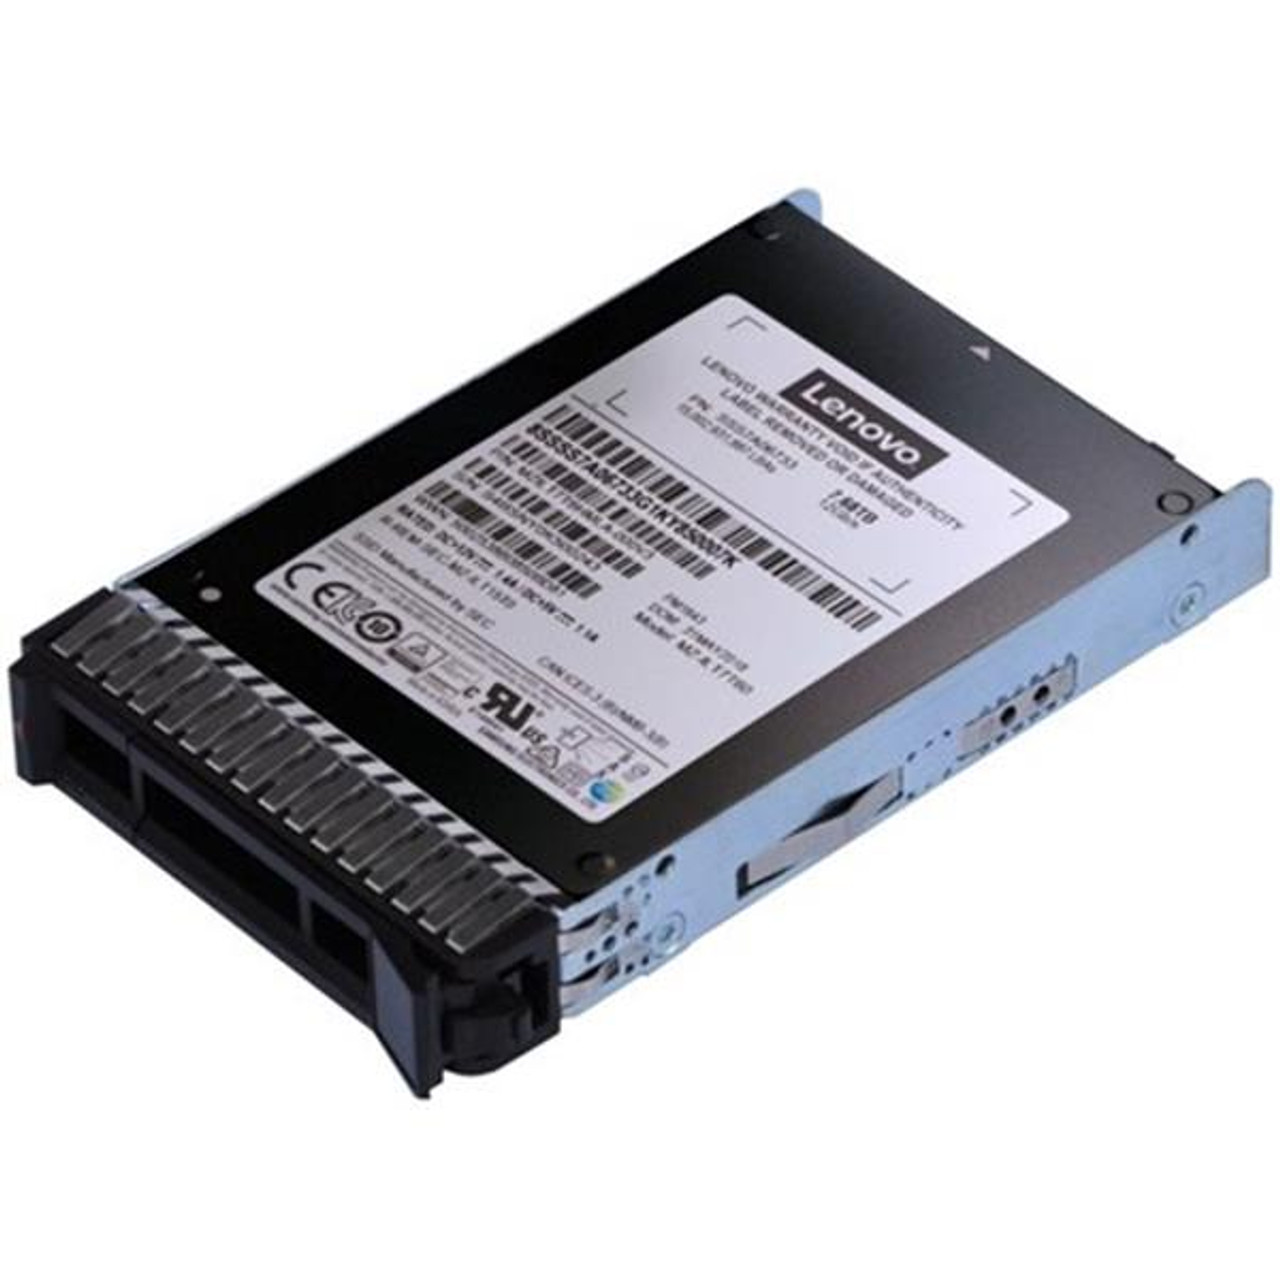 01GV700 Lenovo 7.68TB SAS 12Gbps Read Intensive Hot-Swap 2.5-inch Internal Solid State Drive (SSD)